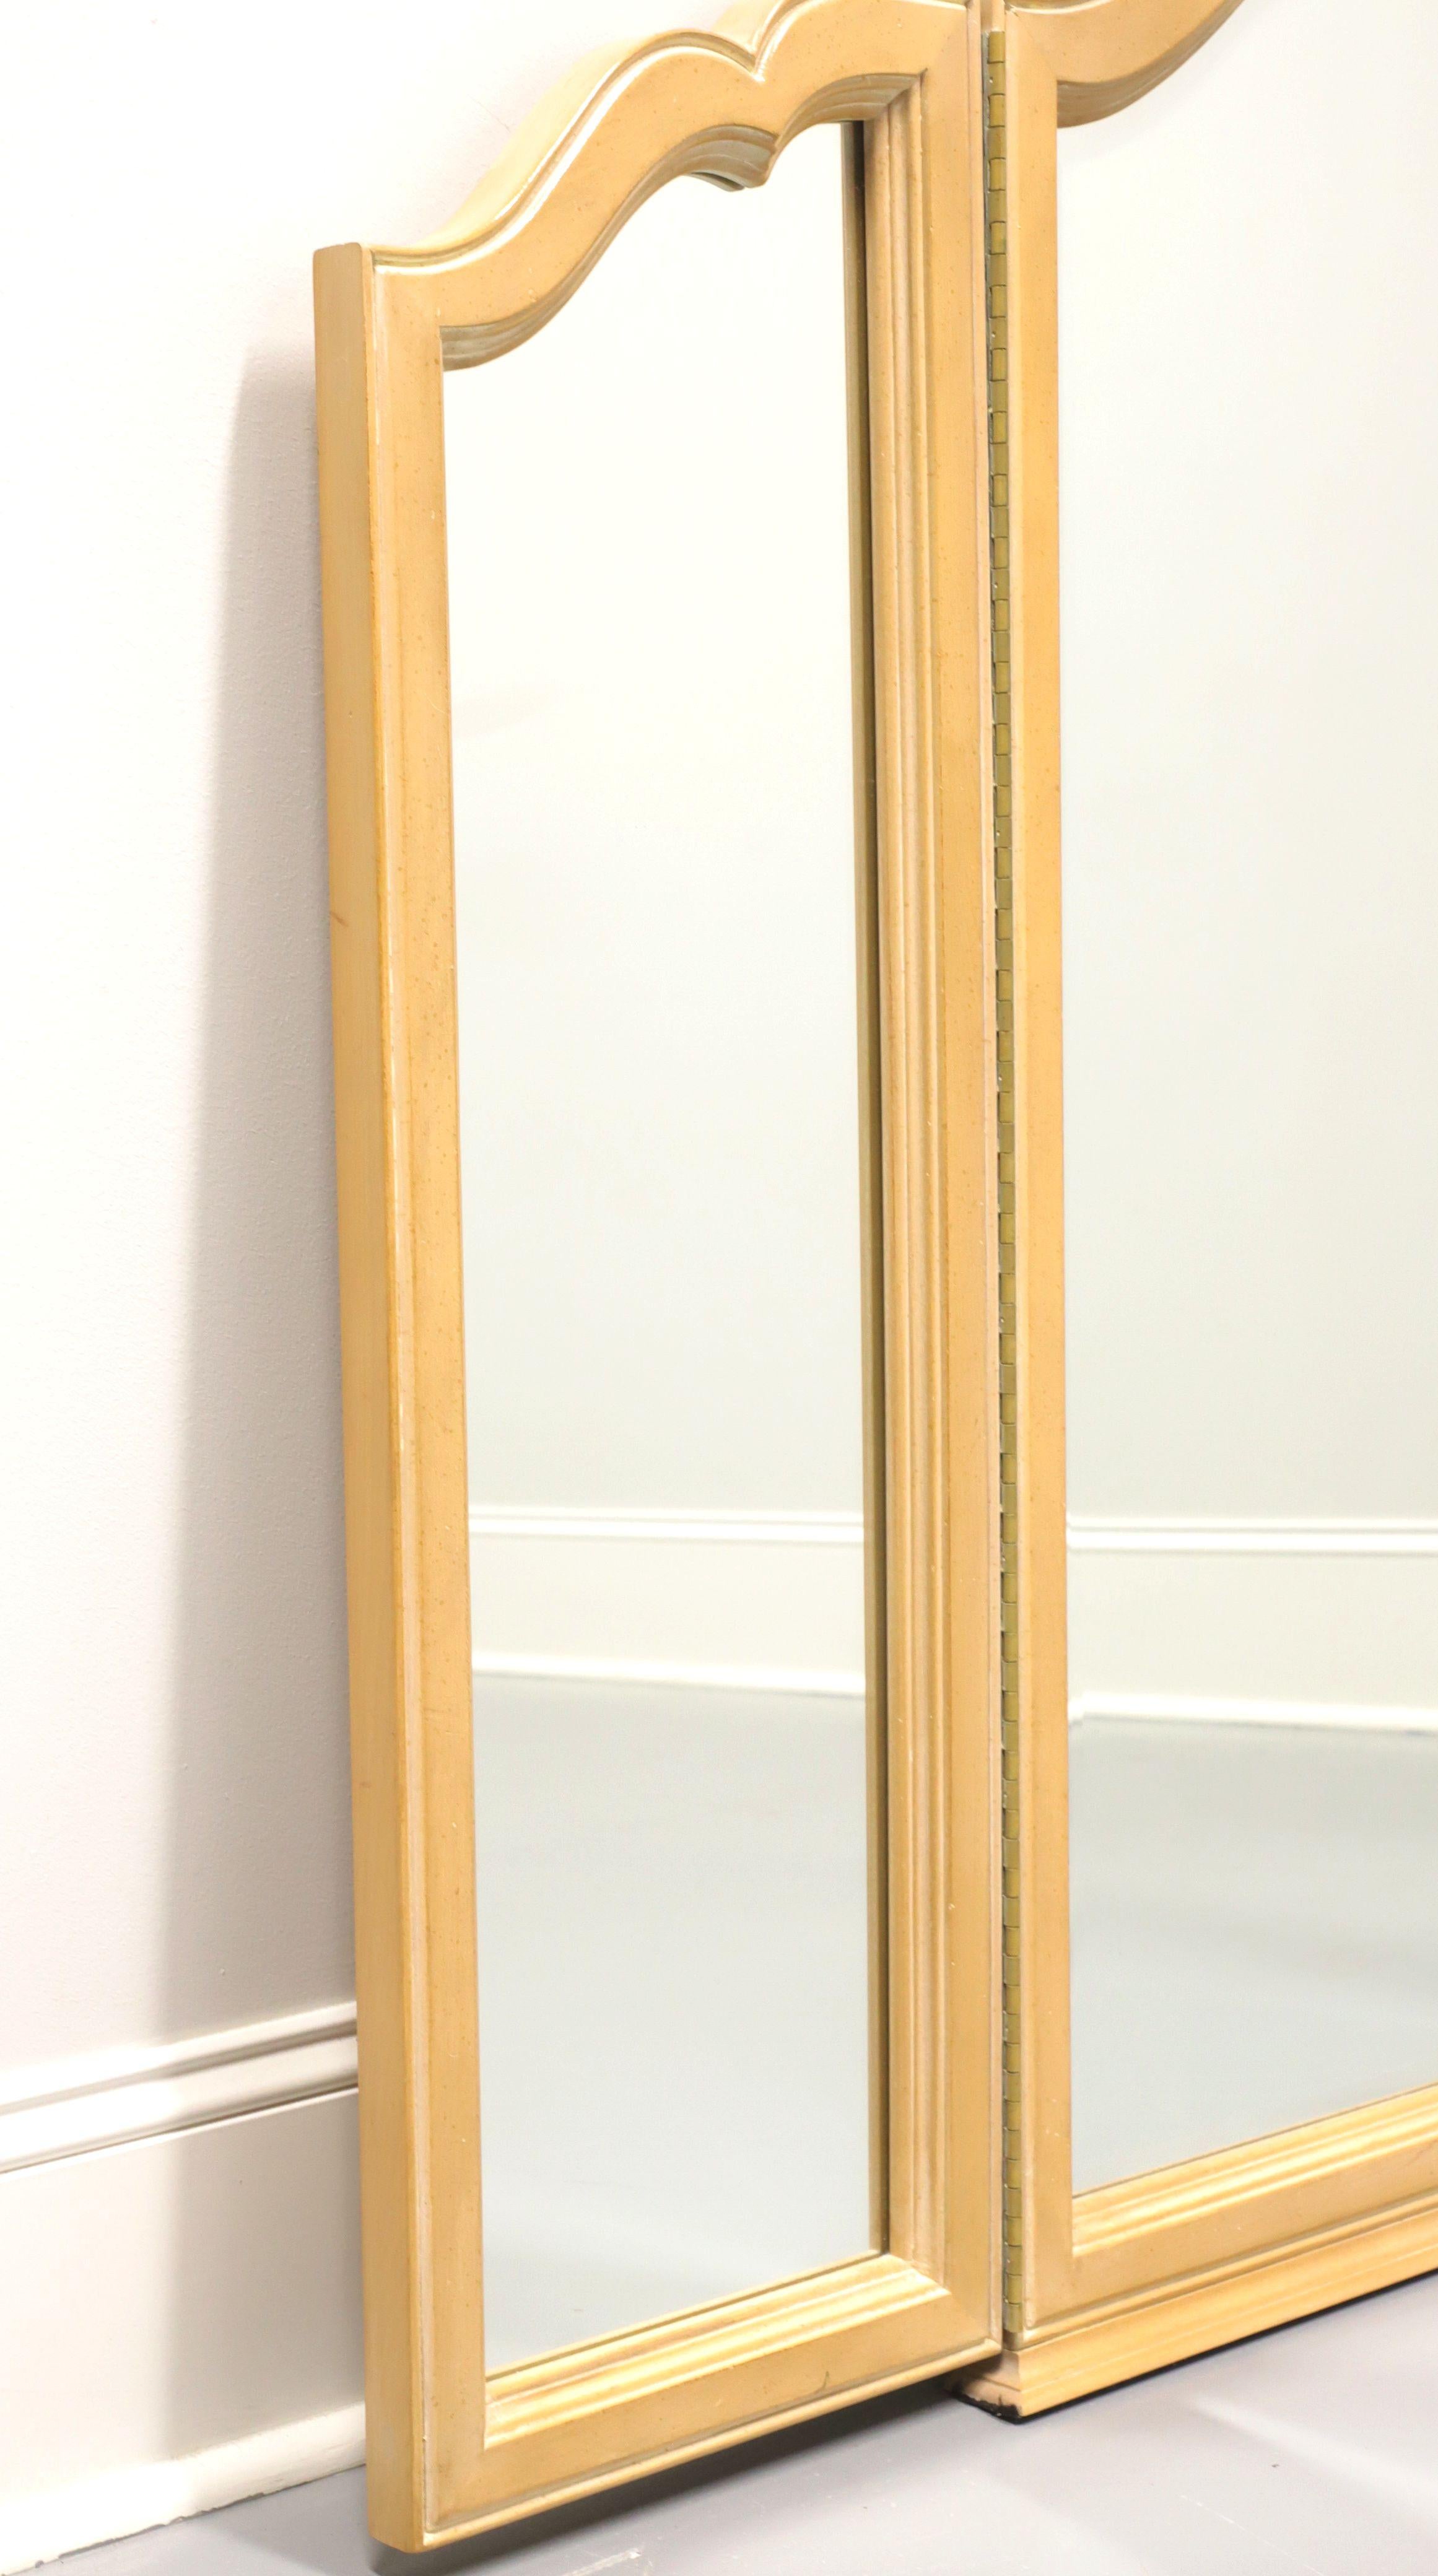 A tri-fold dresser mirror in the French Country style, unbranded, similar quality to Thomasville. Solid hardwood frame with distressed whitewashed finish and a carved shell to the top. Features bevel edge mirrored glass in the center and two side